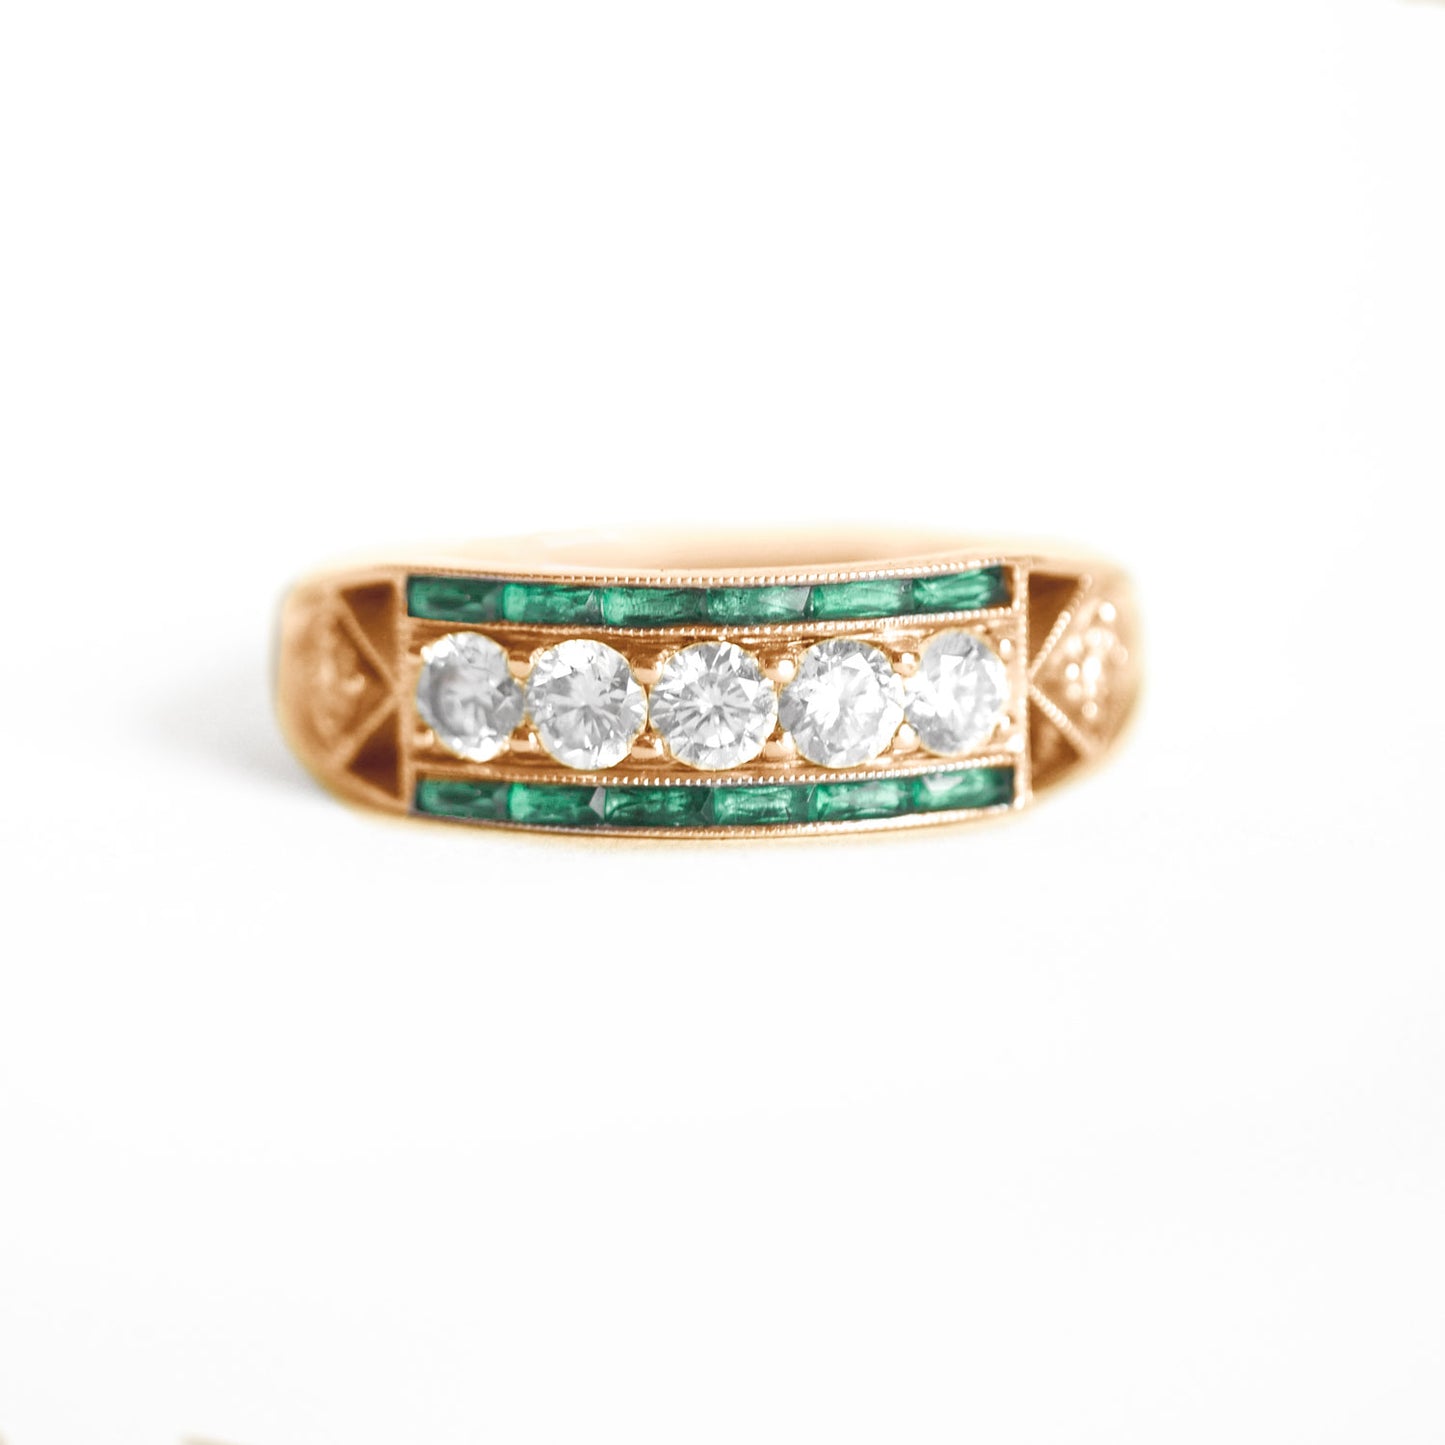 Art Deco Five Diamond Ring with French Cut Emeralds